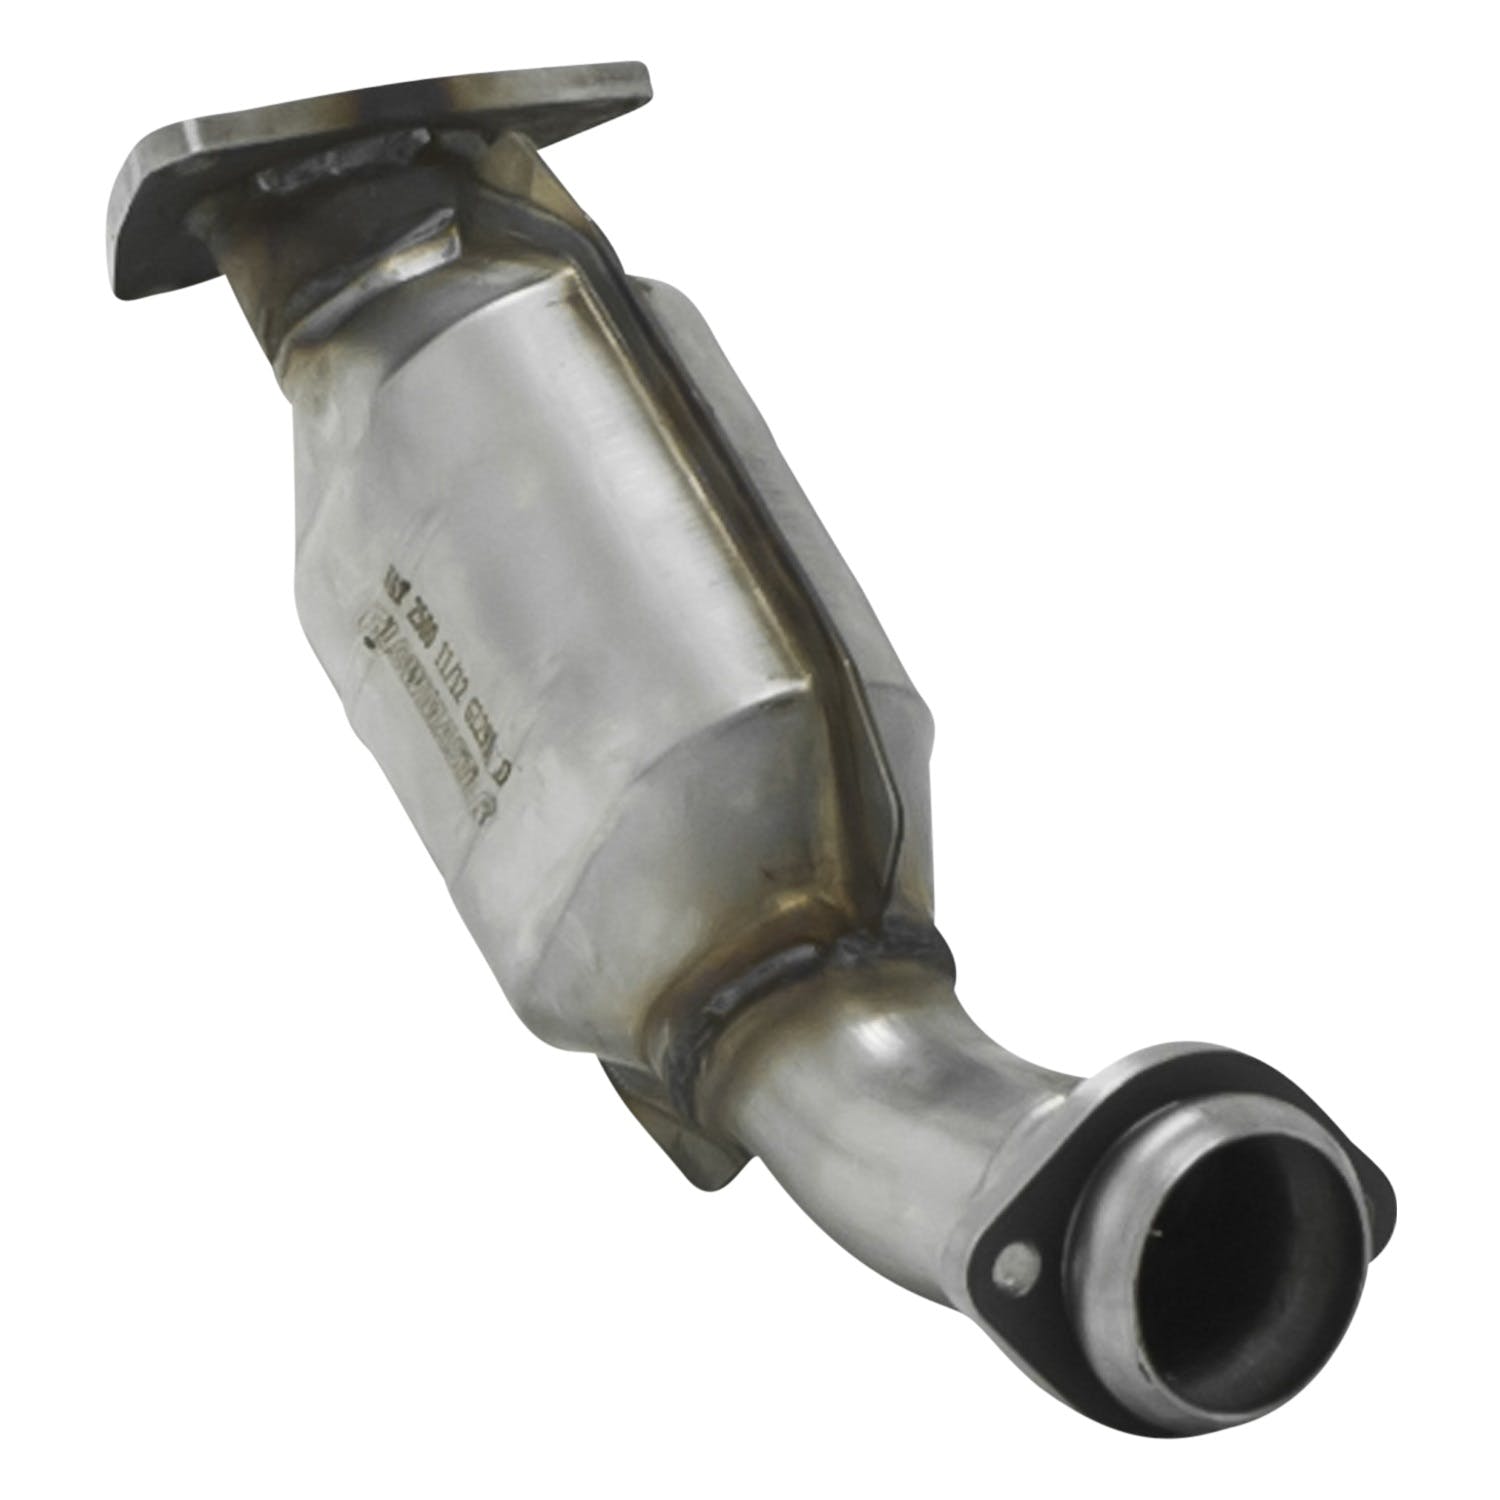 Flowmaster Catalytic Converters 2010008 Catalytic Converter-Direct Fit-2.25 Inlet/Outlet-Left-49 State